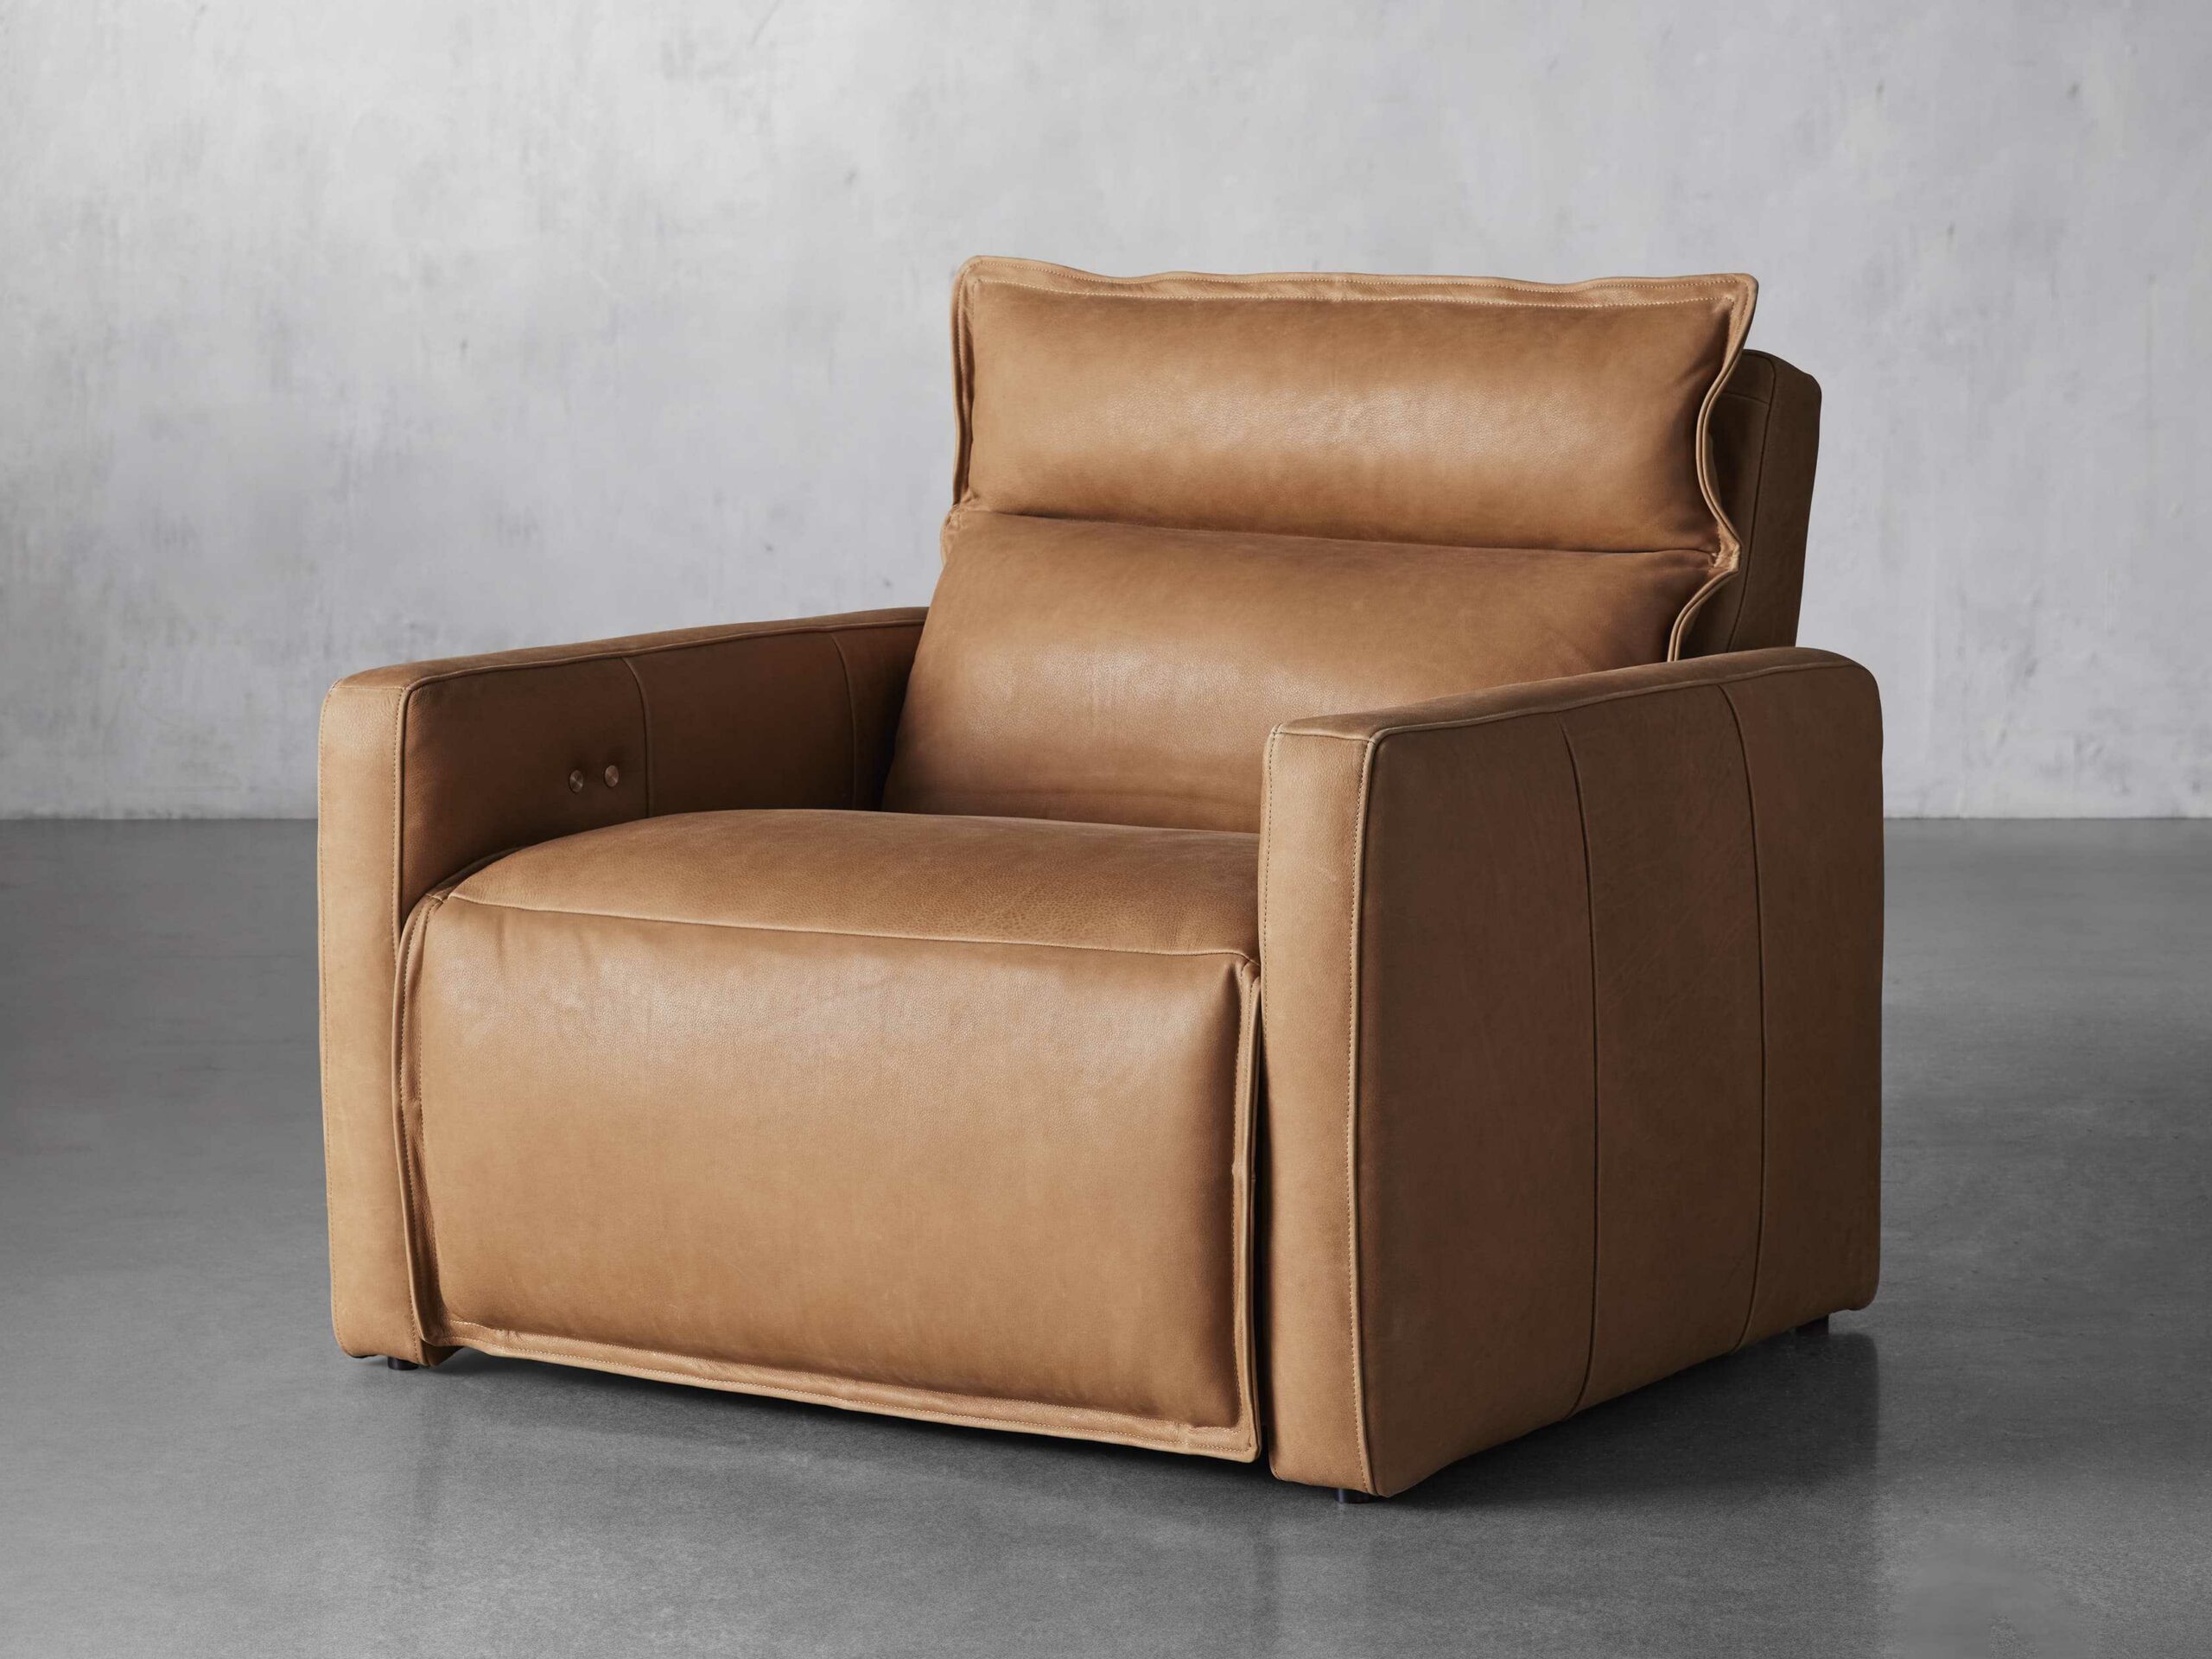 A camel brown leather Arhaus club chair recliner in a grey room